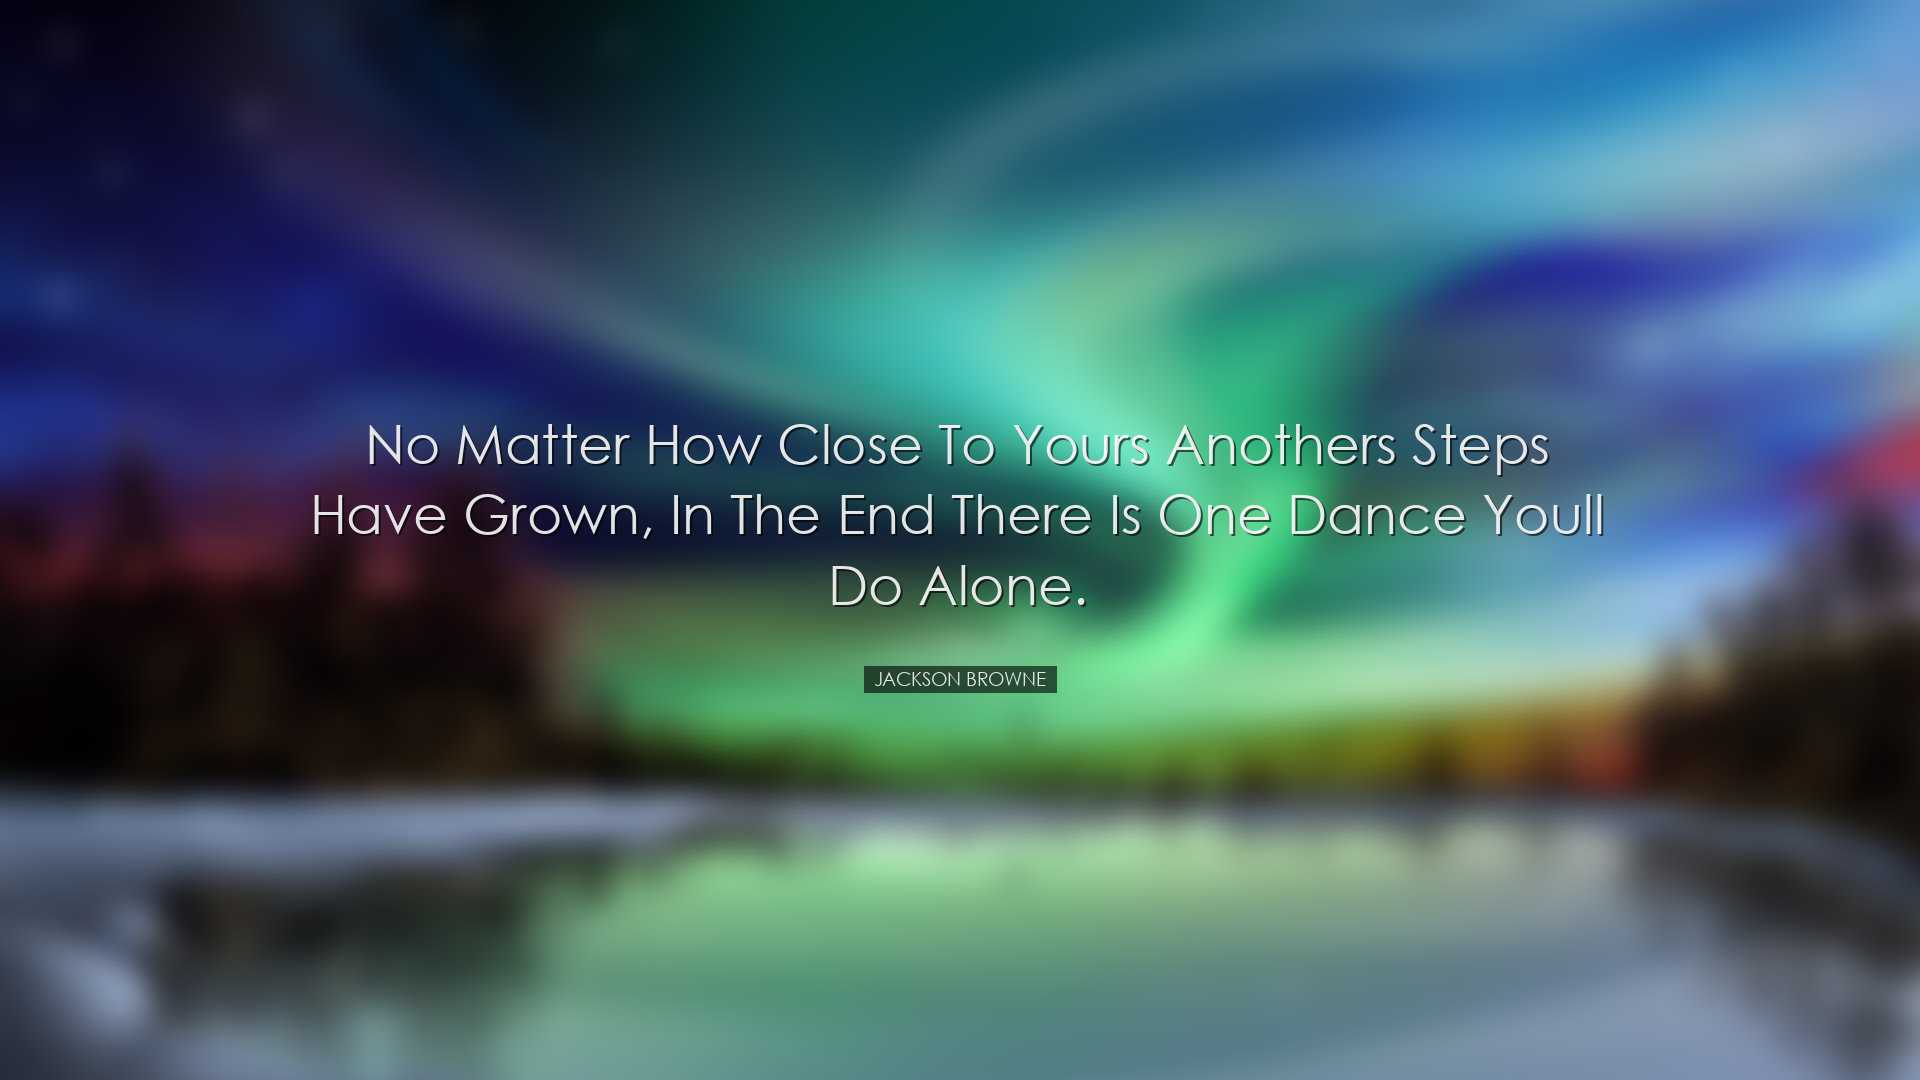 No matter how close to yours anothers steps have grown, in the end